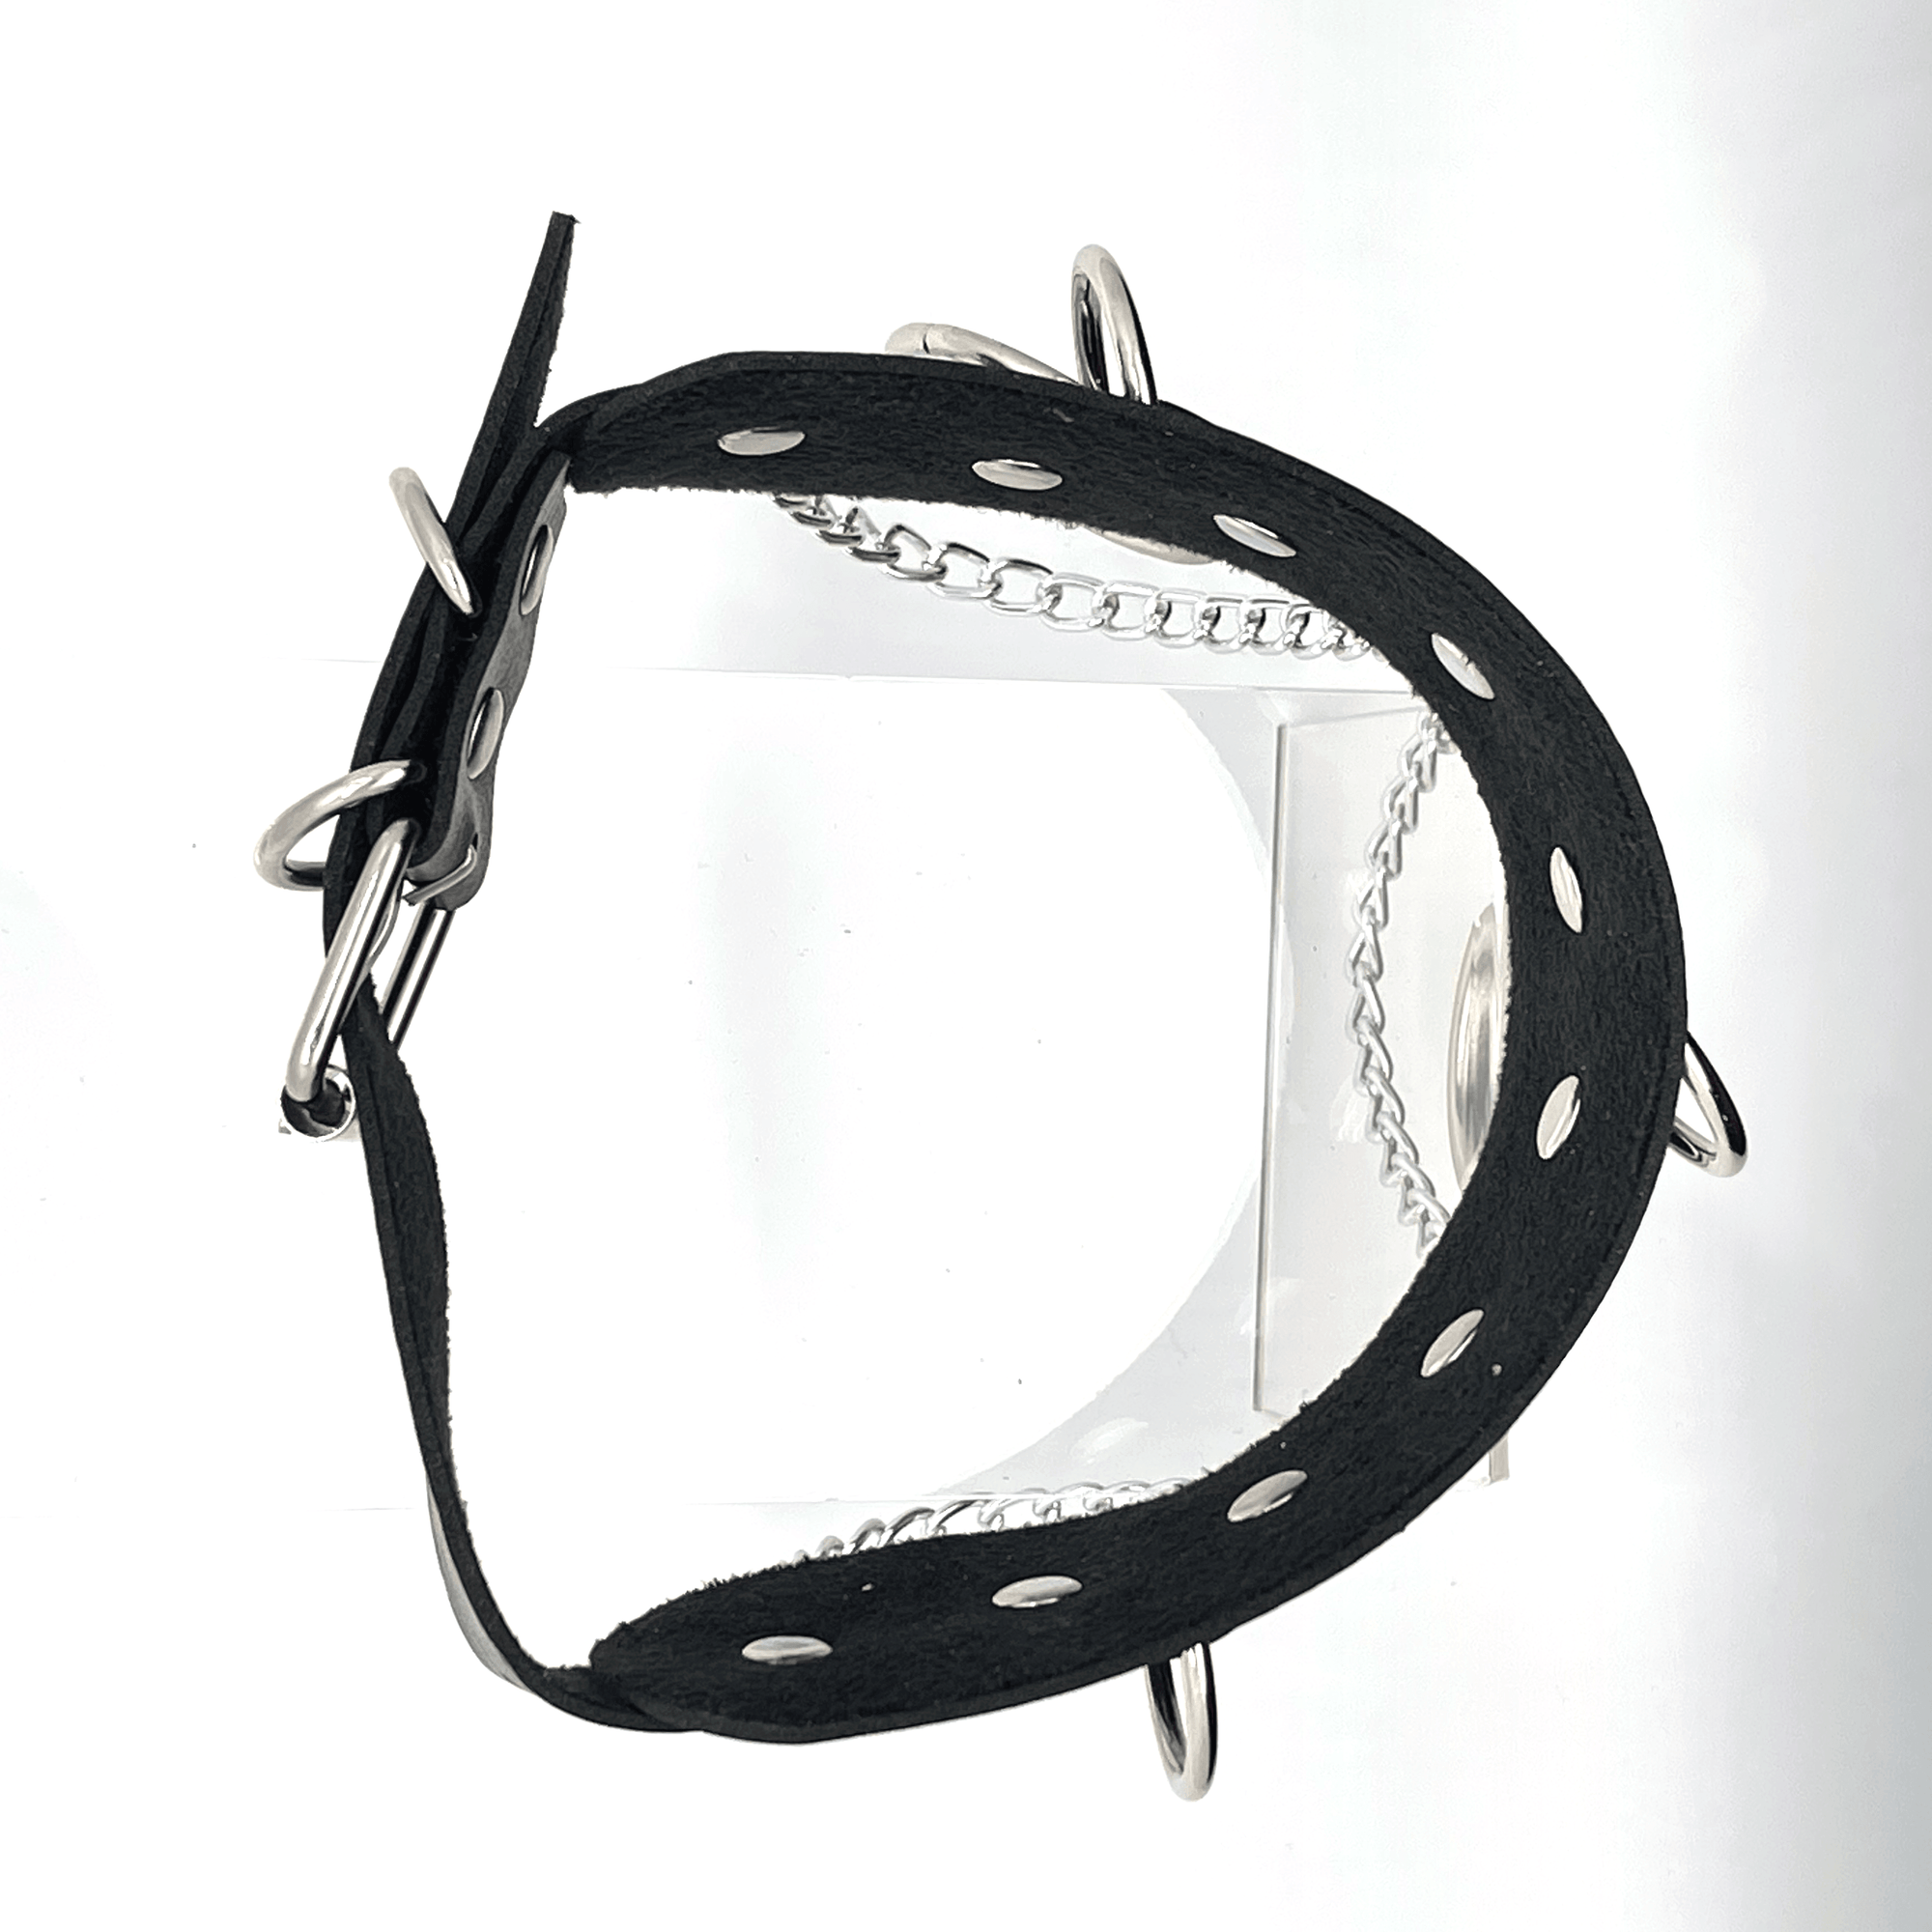 Black Leather O Ring Choker Harness Necklace - No System